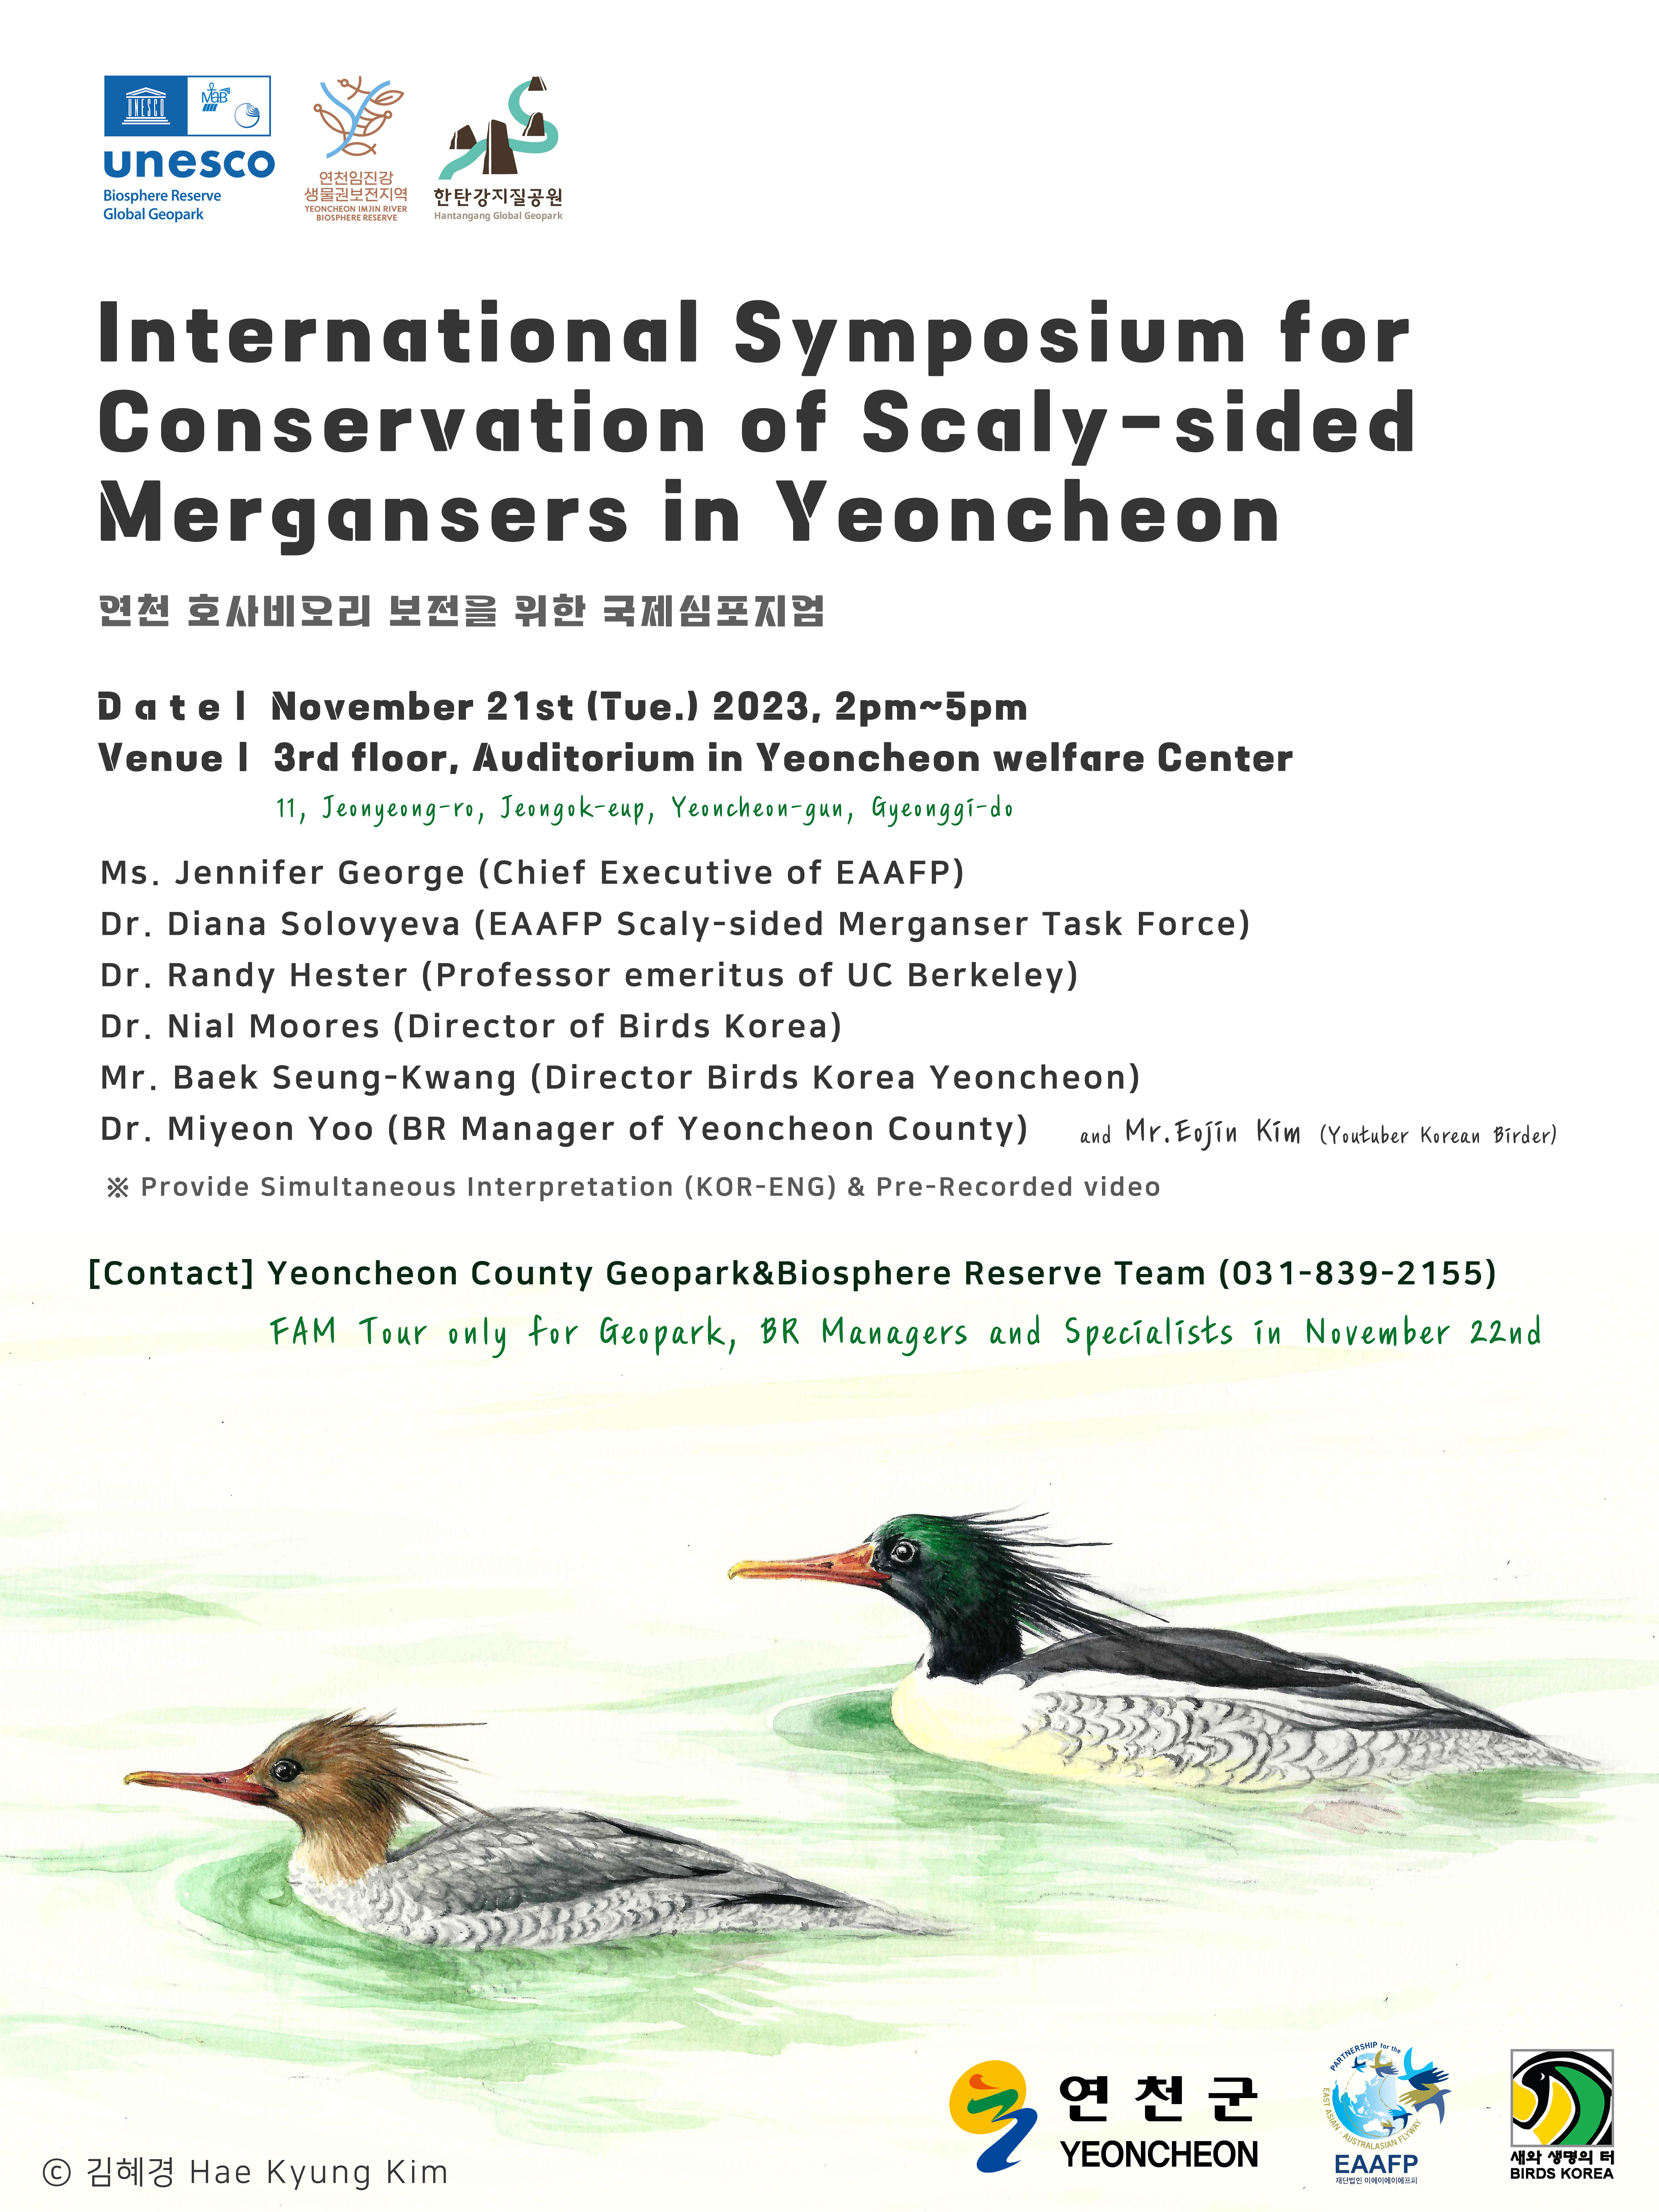 The International Symposium for Conservation of Scaly-sided Mergansers in Yeoncheon image 1